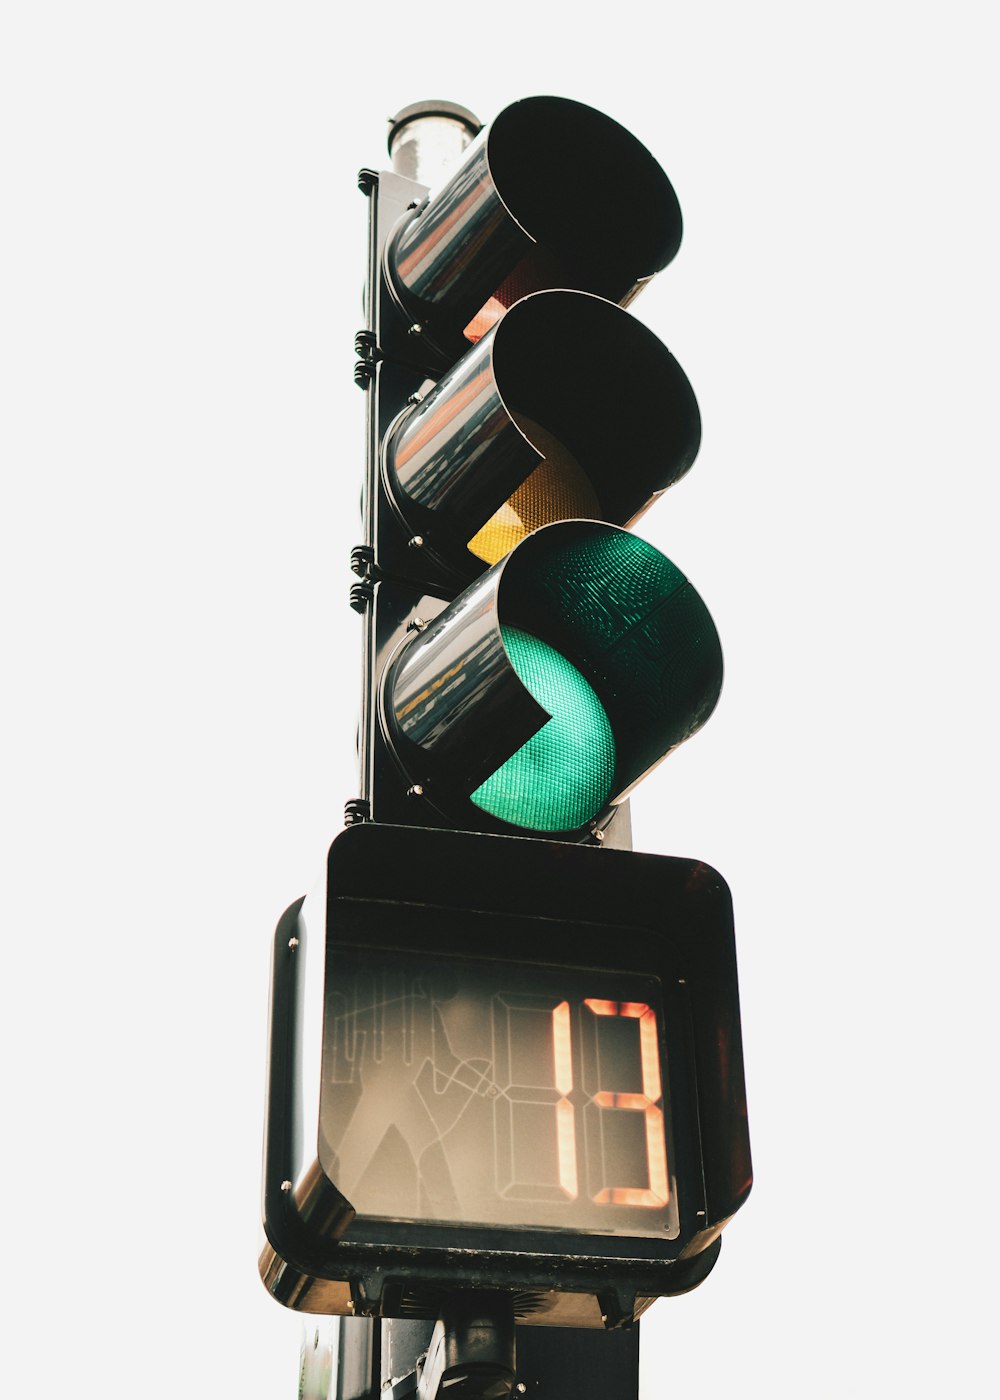 black traffic light displaying green light and number 13